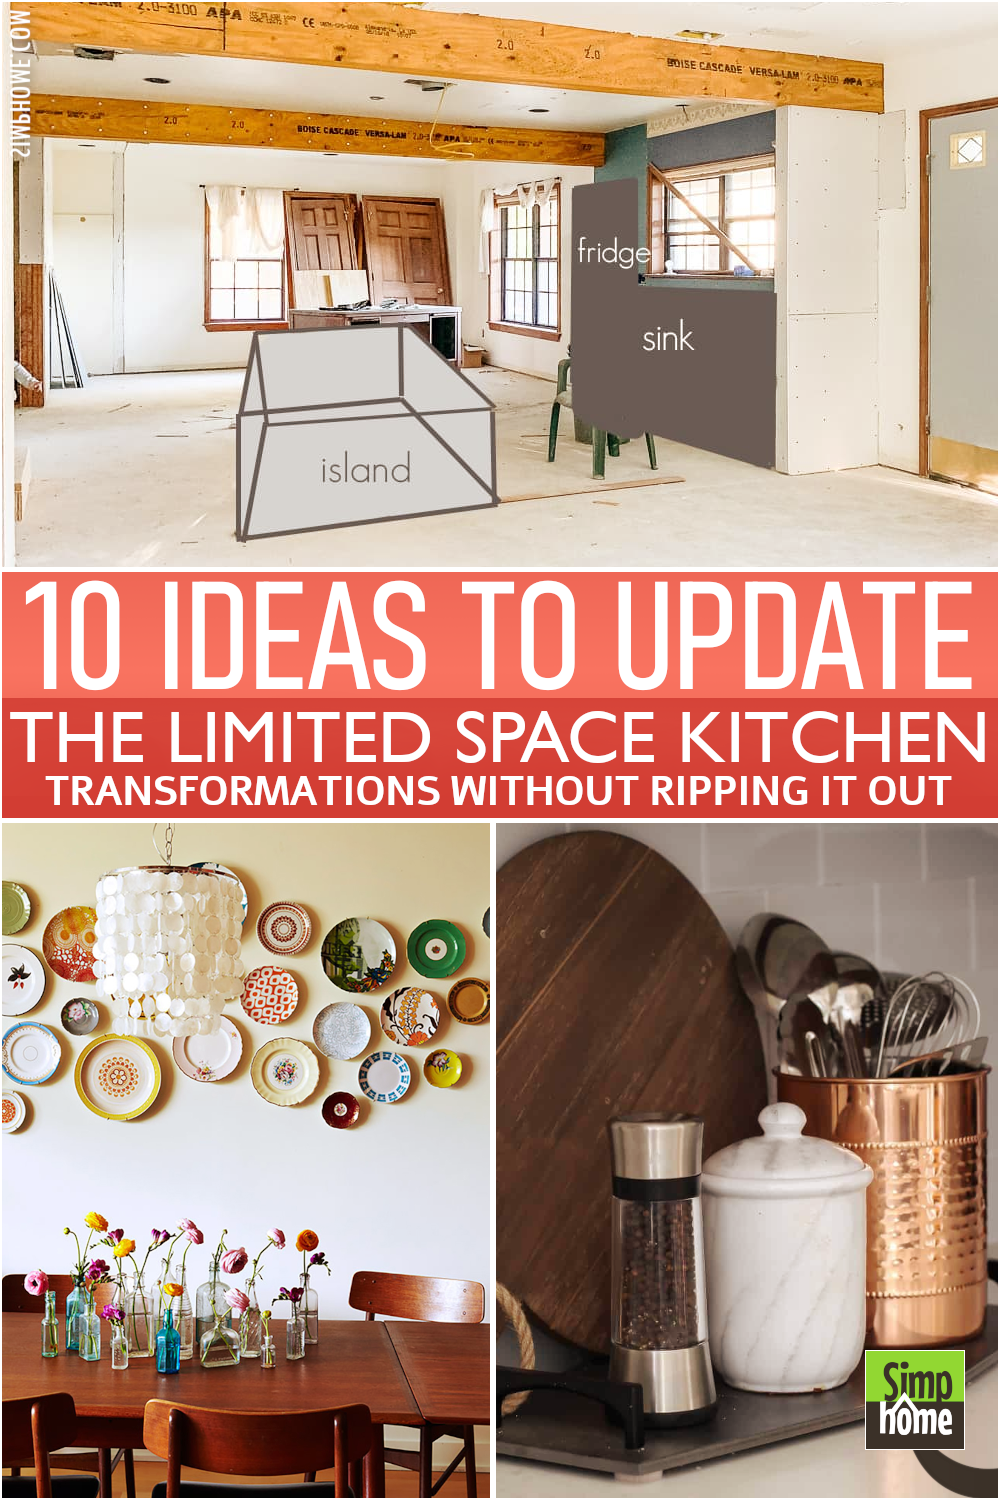 10 Ideas On How To Update A Kitchen Without Ripping It Poster